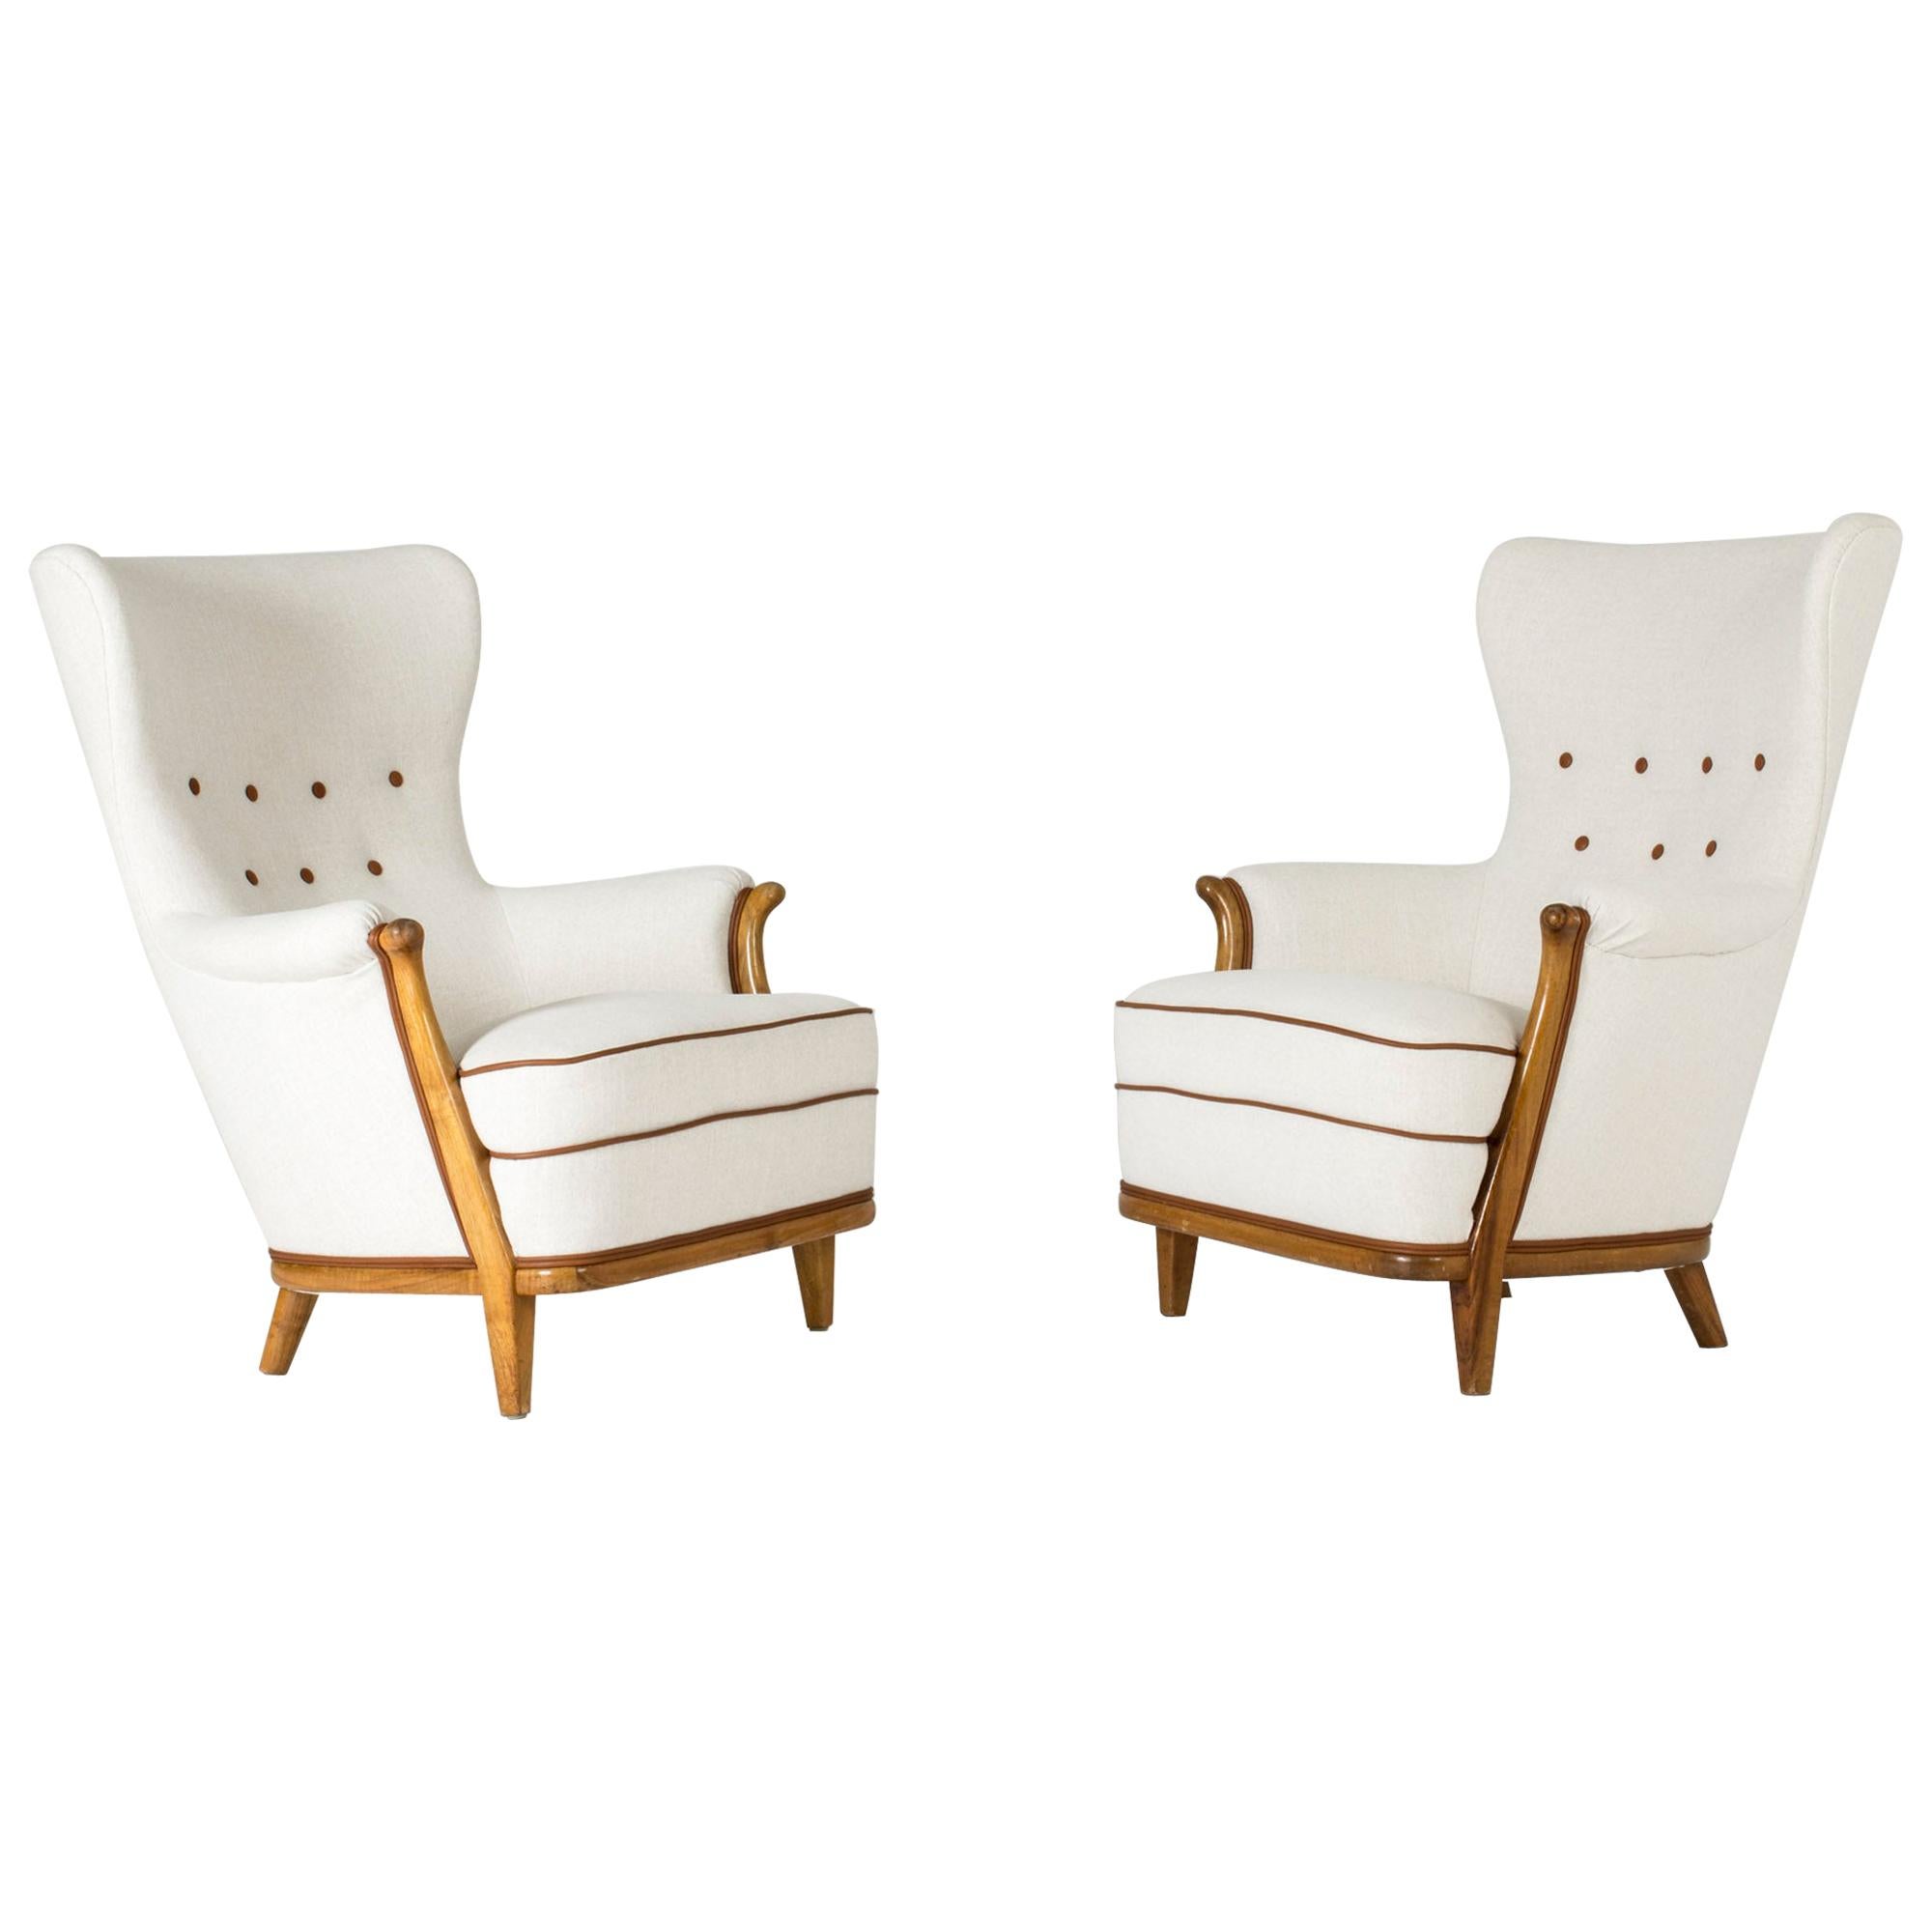 Pair of 1930s Lounge Chairs by Gustaf Allert